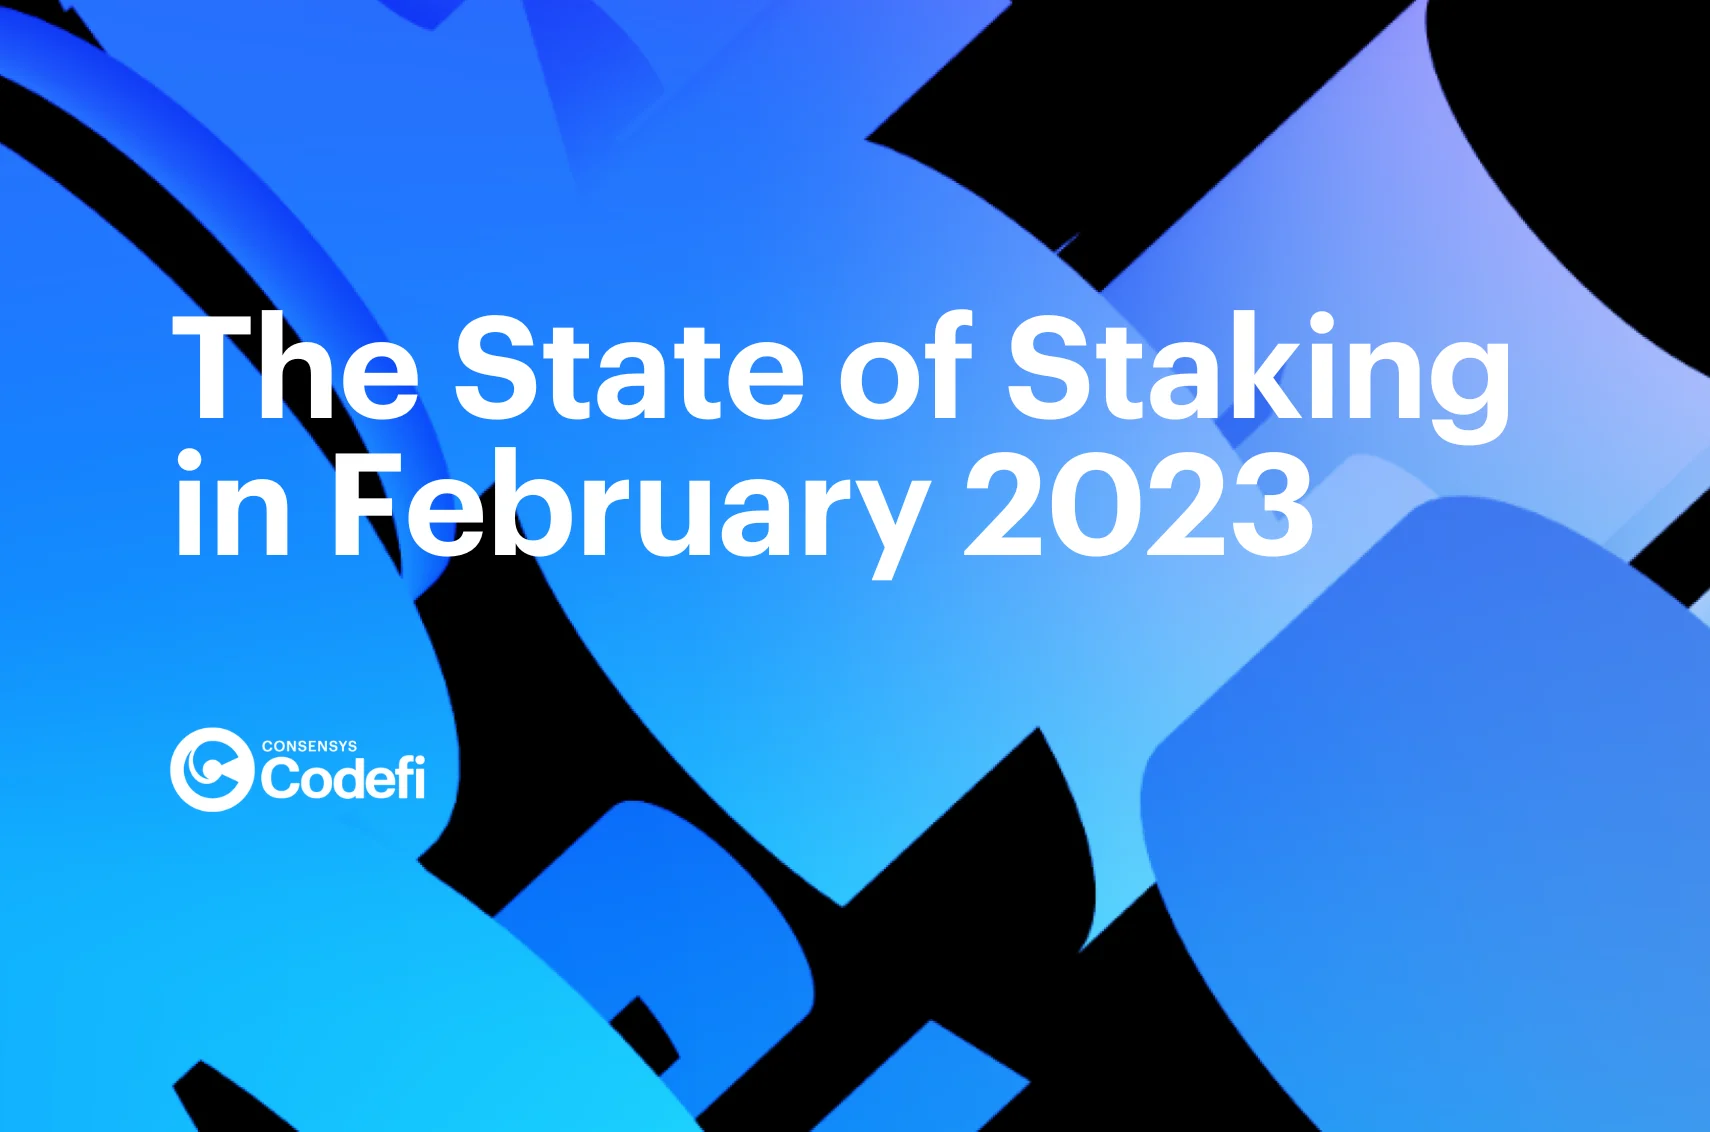 Image: The State of Staking in February 2023